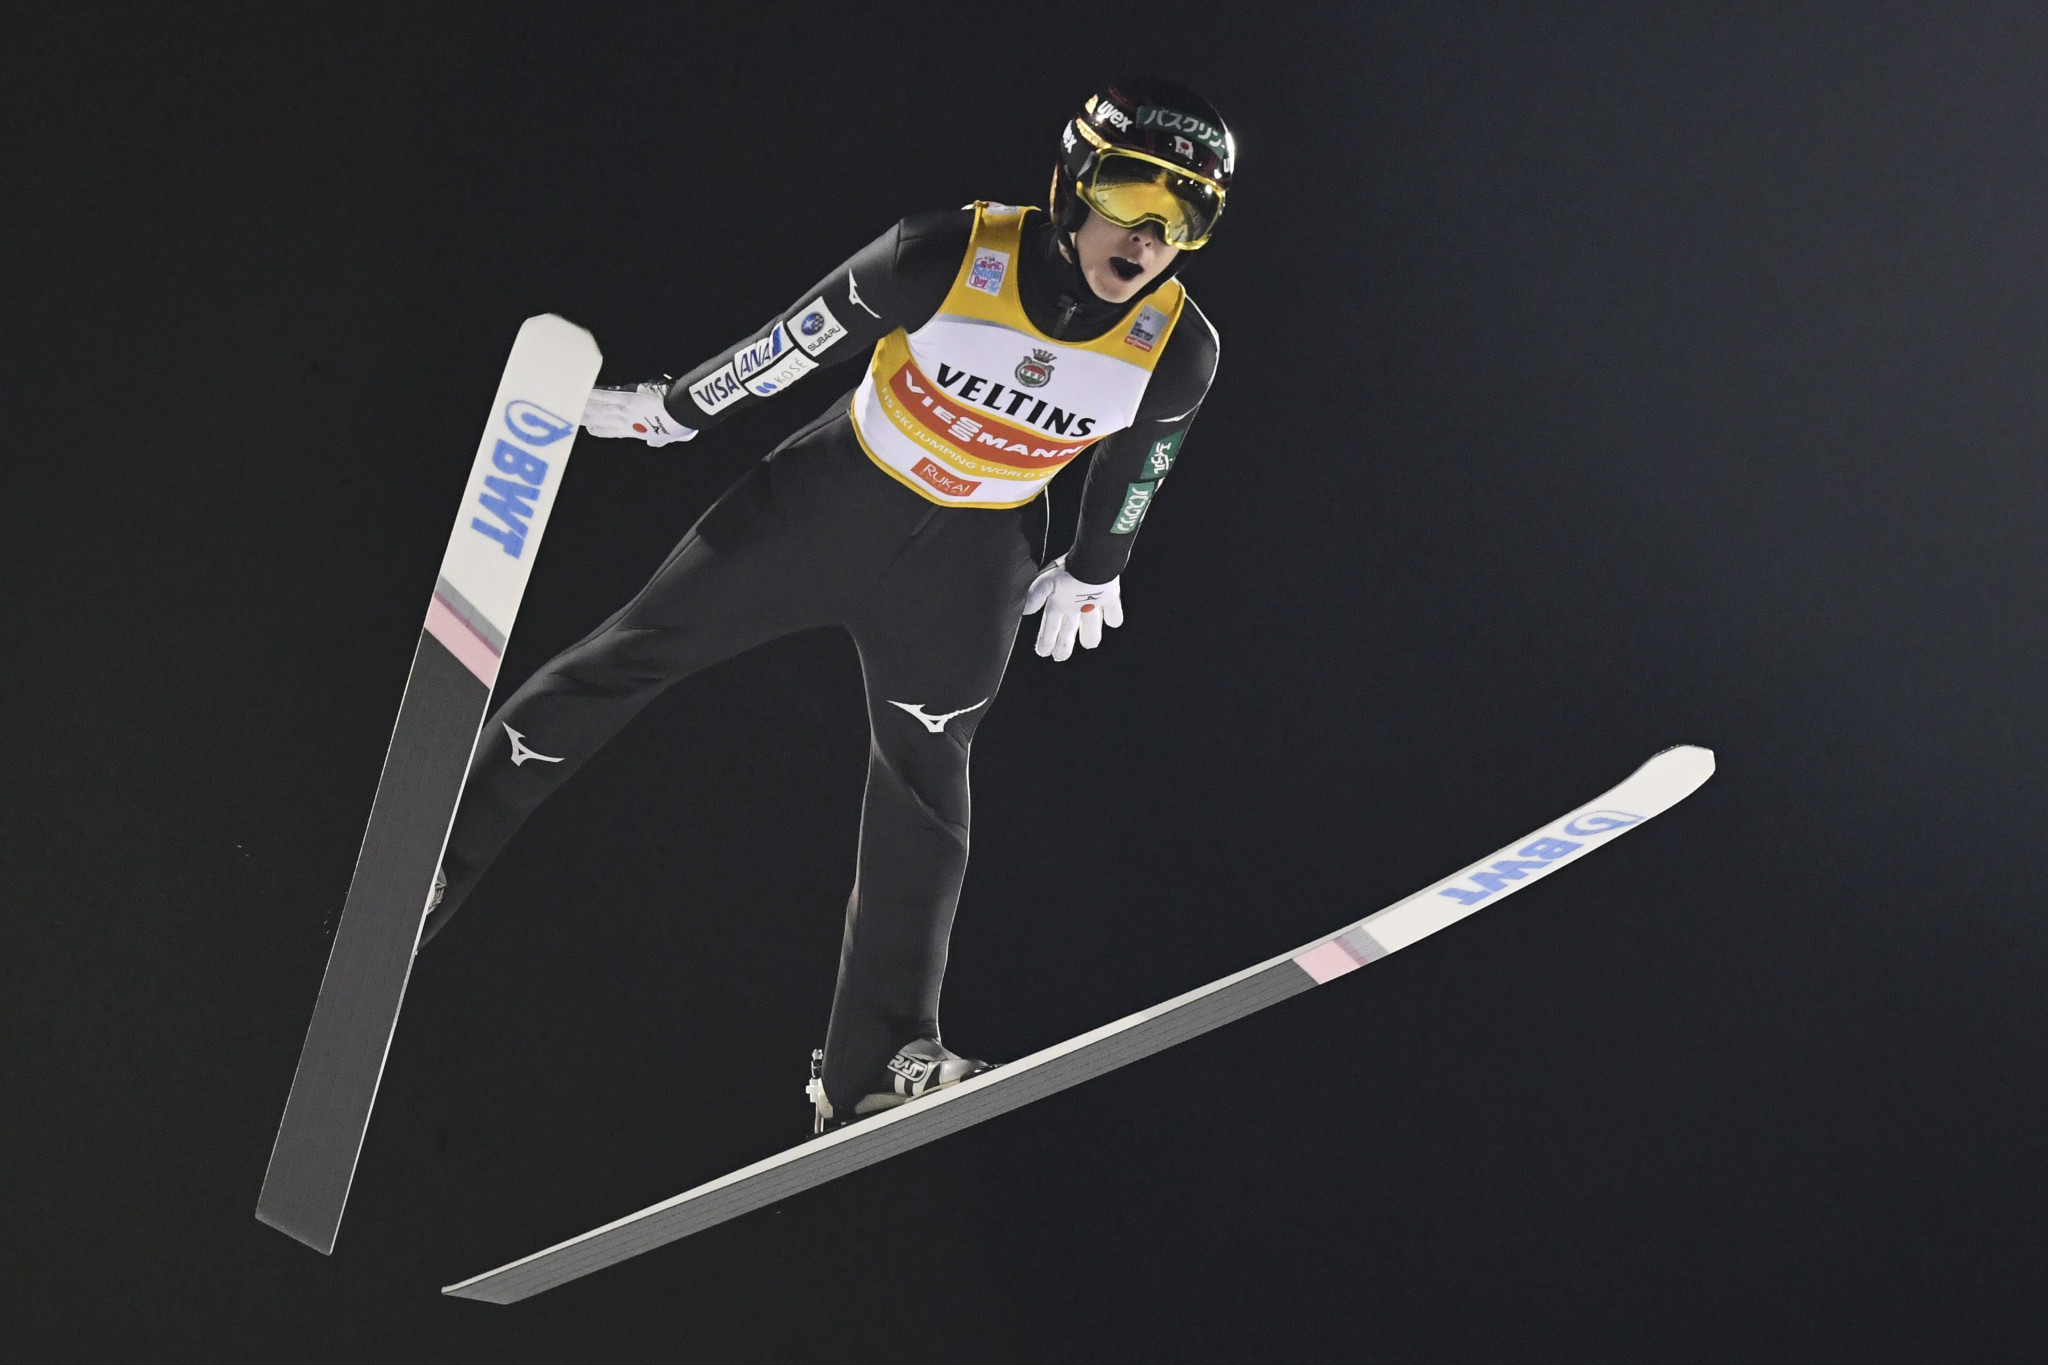 Ryoyu Kobayashi of Japan has extended his overall lead in the Ski Jumping World Cup rankings after winning the event at Nizhny Tagil ©Getty Images